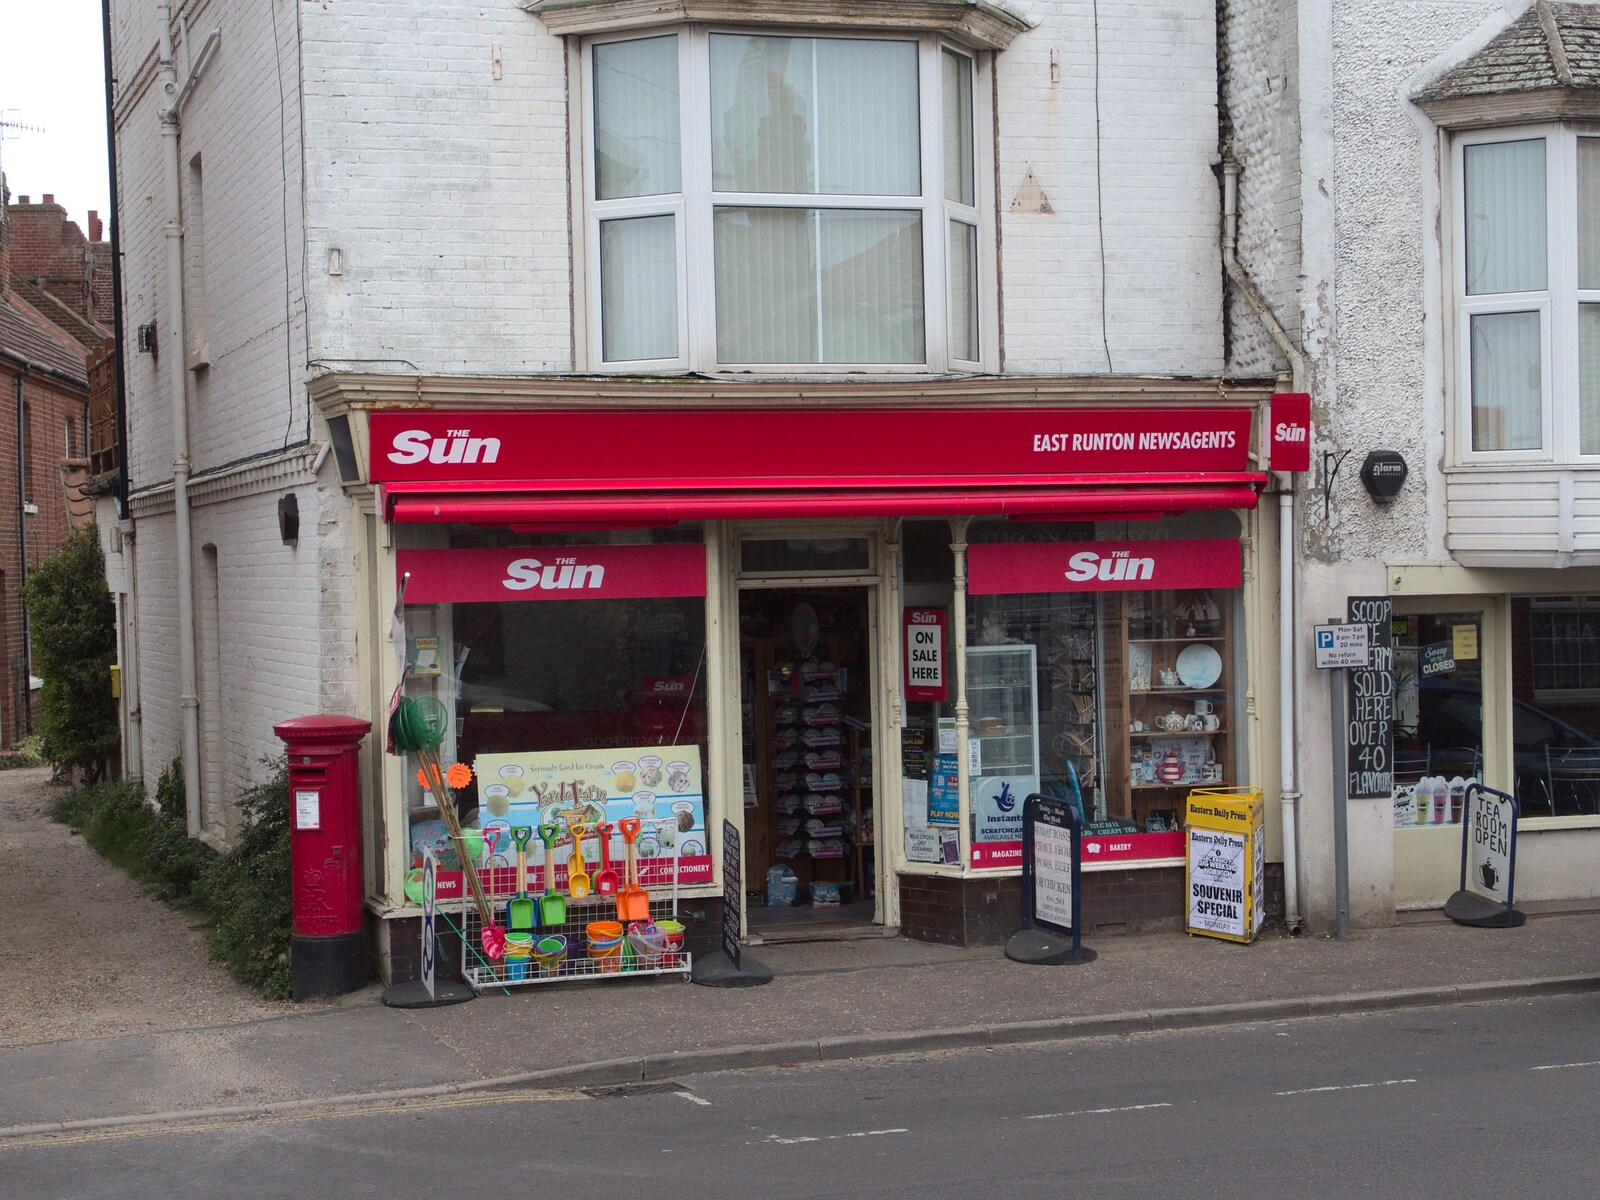 A classic newsagents from A Birthday Camping Trip, East Runton, North Norfolk - 26th May 2015